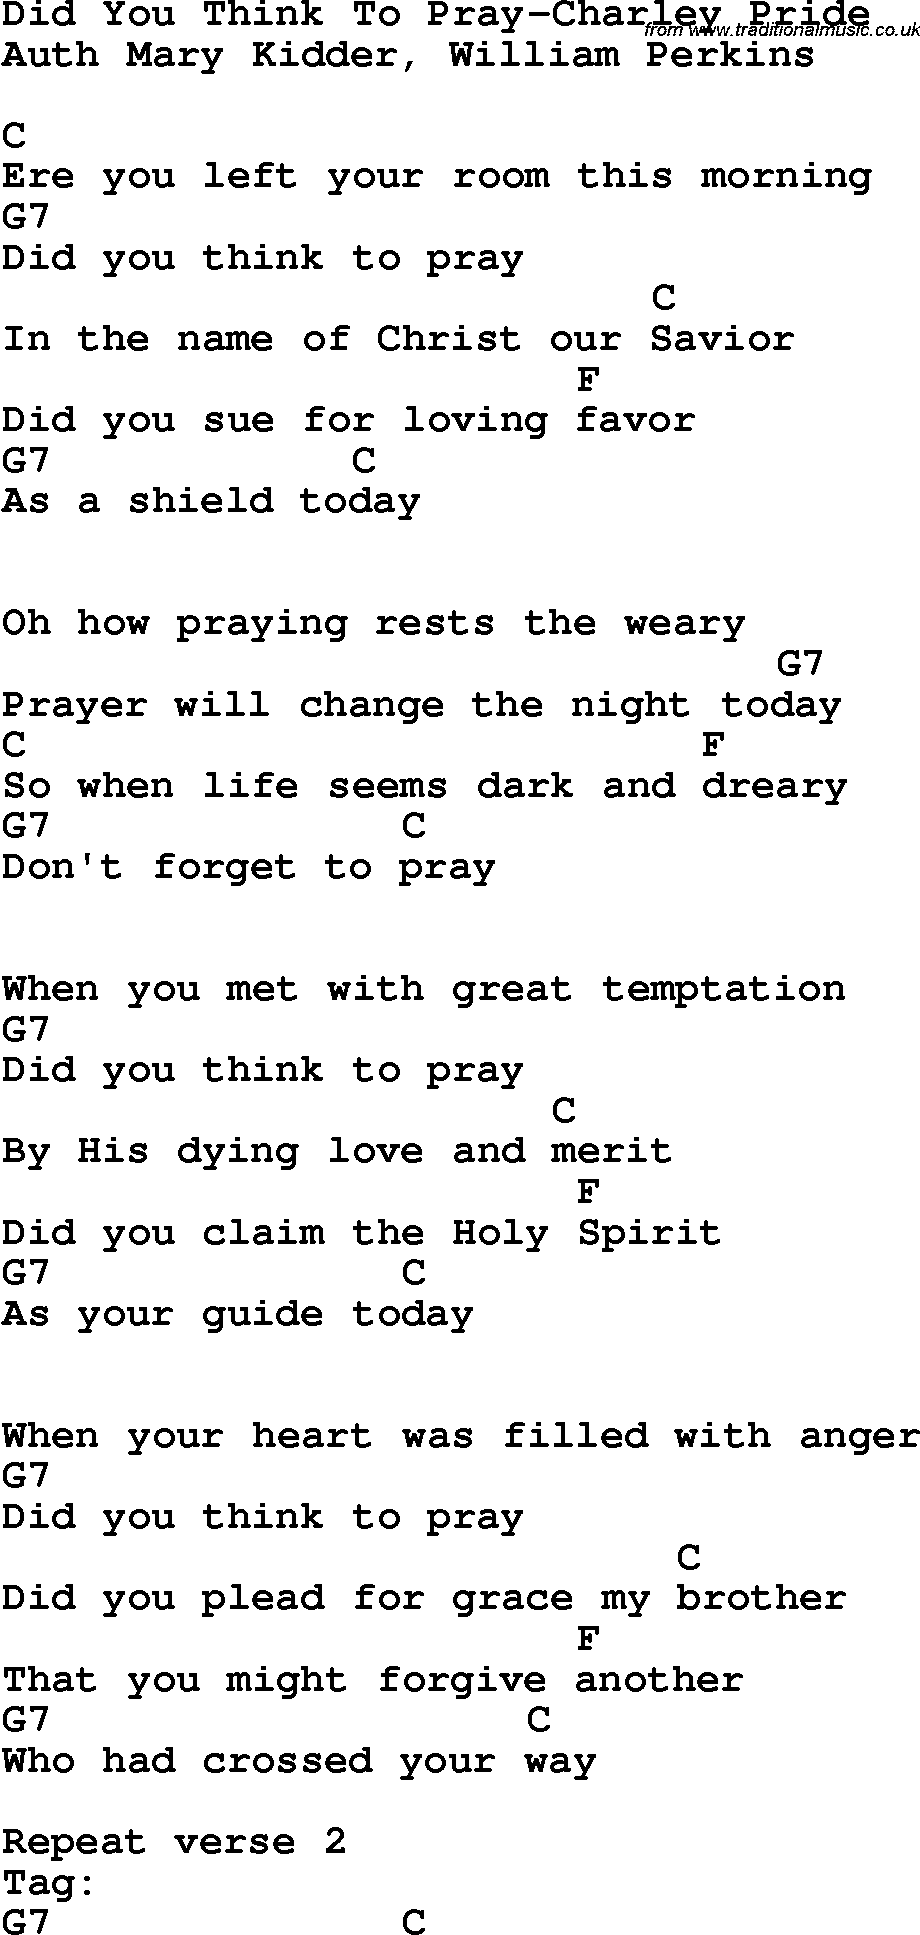 Country, Southern and Bluegrass Gospel Song Did You Think To Pray-Charley Pride lyrics and chords